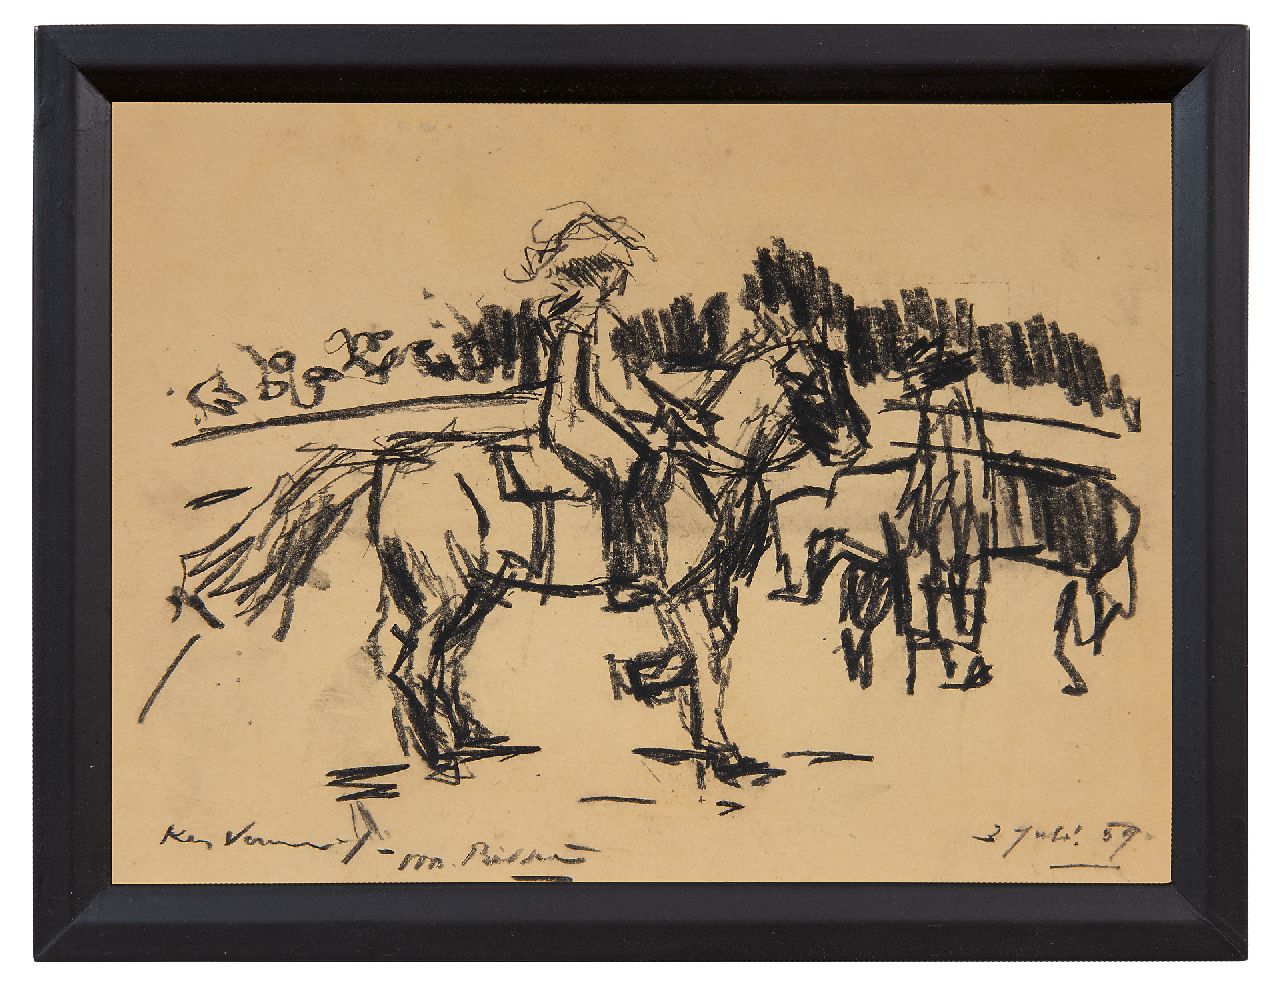 Verwey K.  | Kees Verwey | Watercolours and drawings offered for sale | Two horsemen, charcoal on paper 21.9 x 29.6 cm, signed l.l. and dated 3 July 59